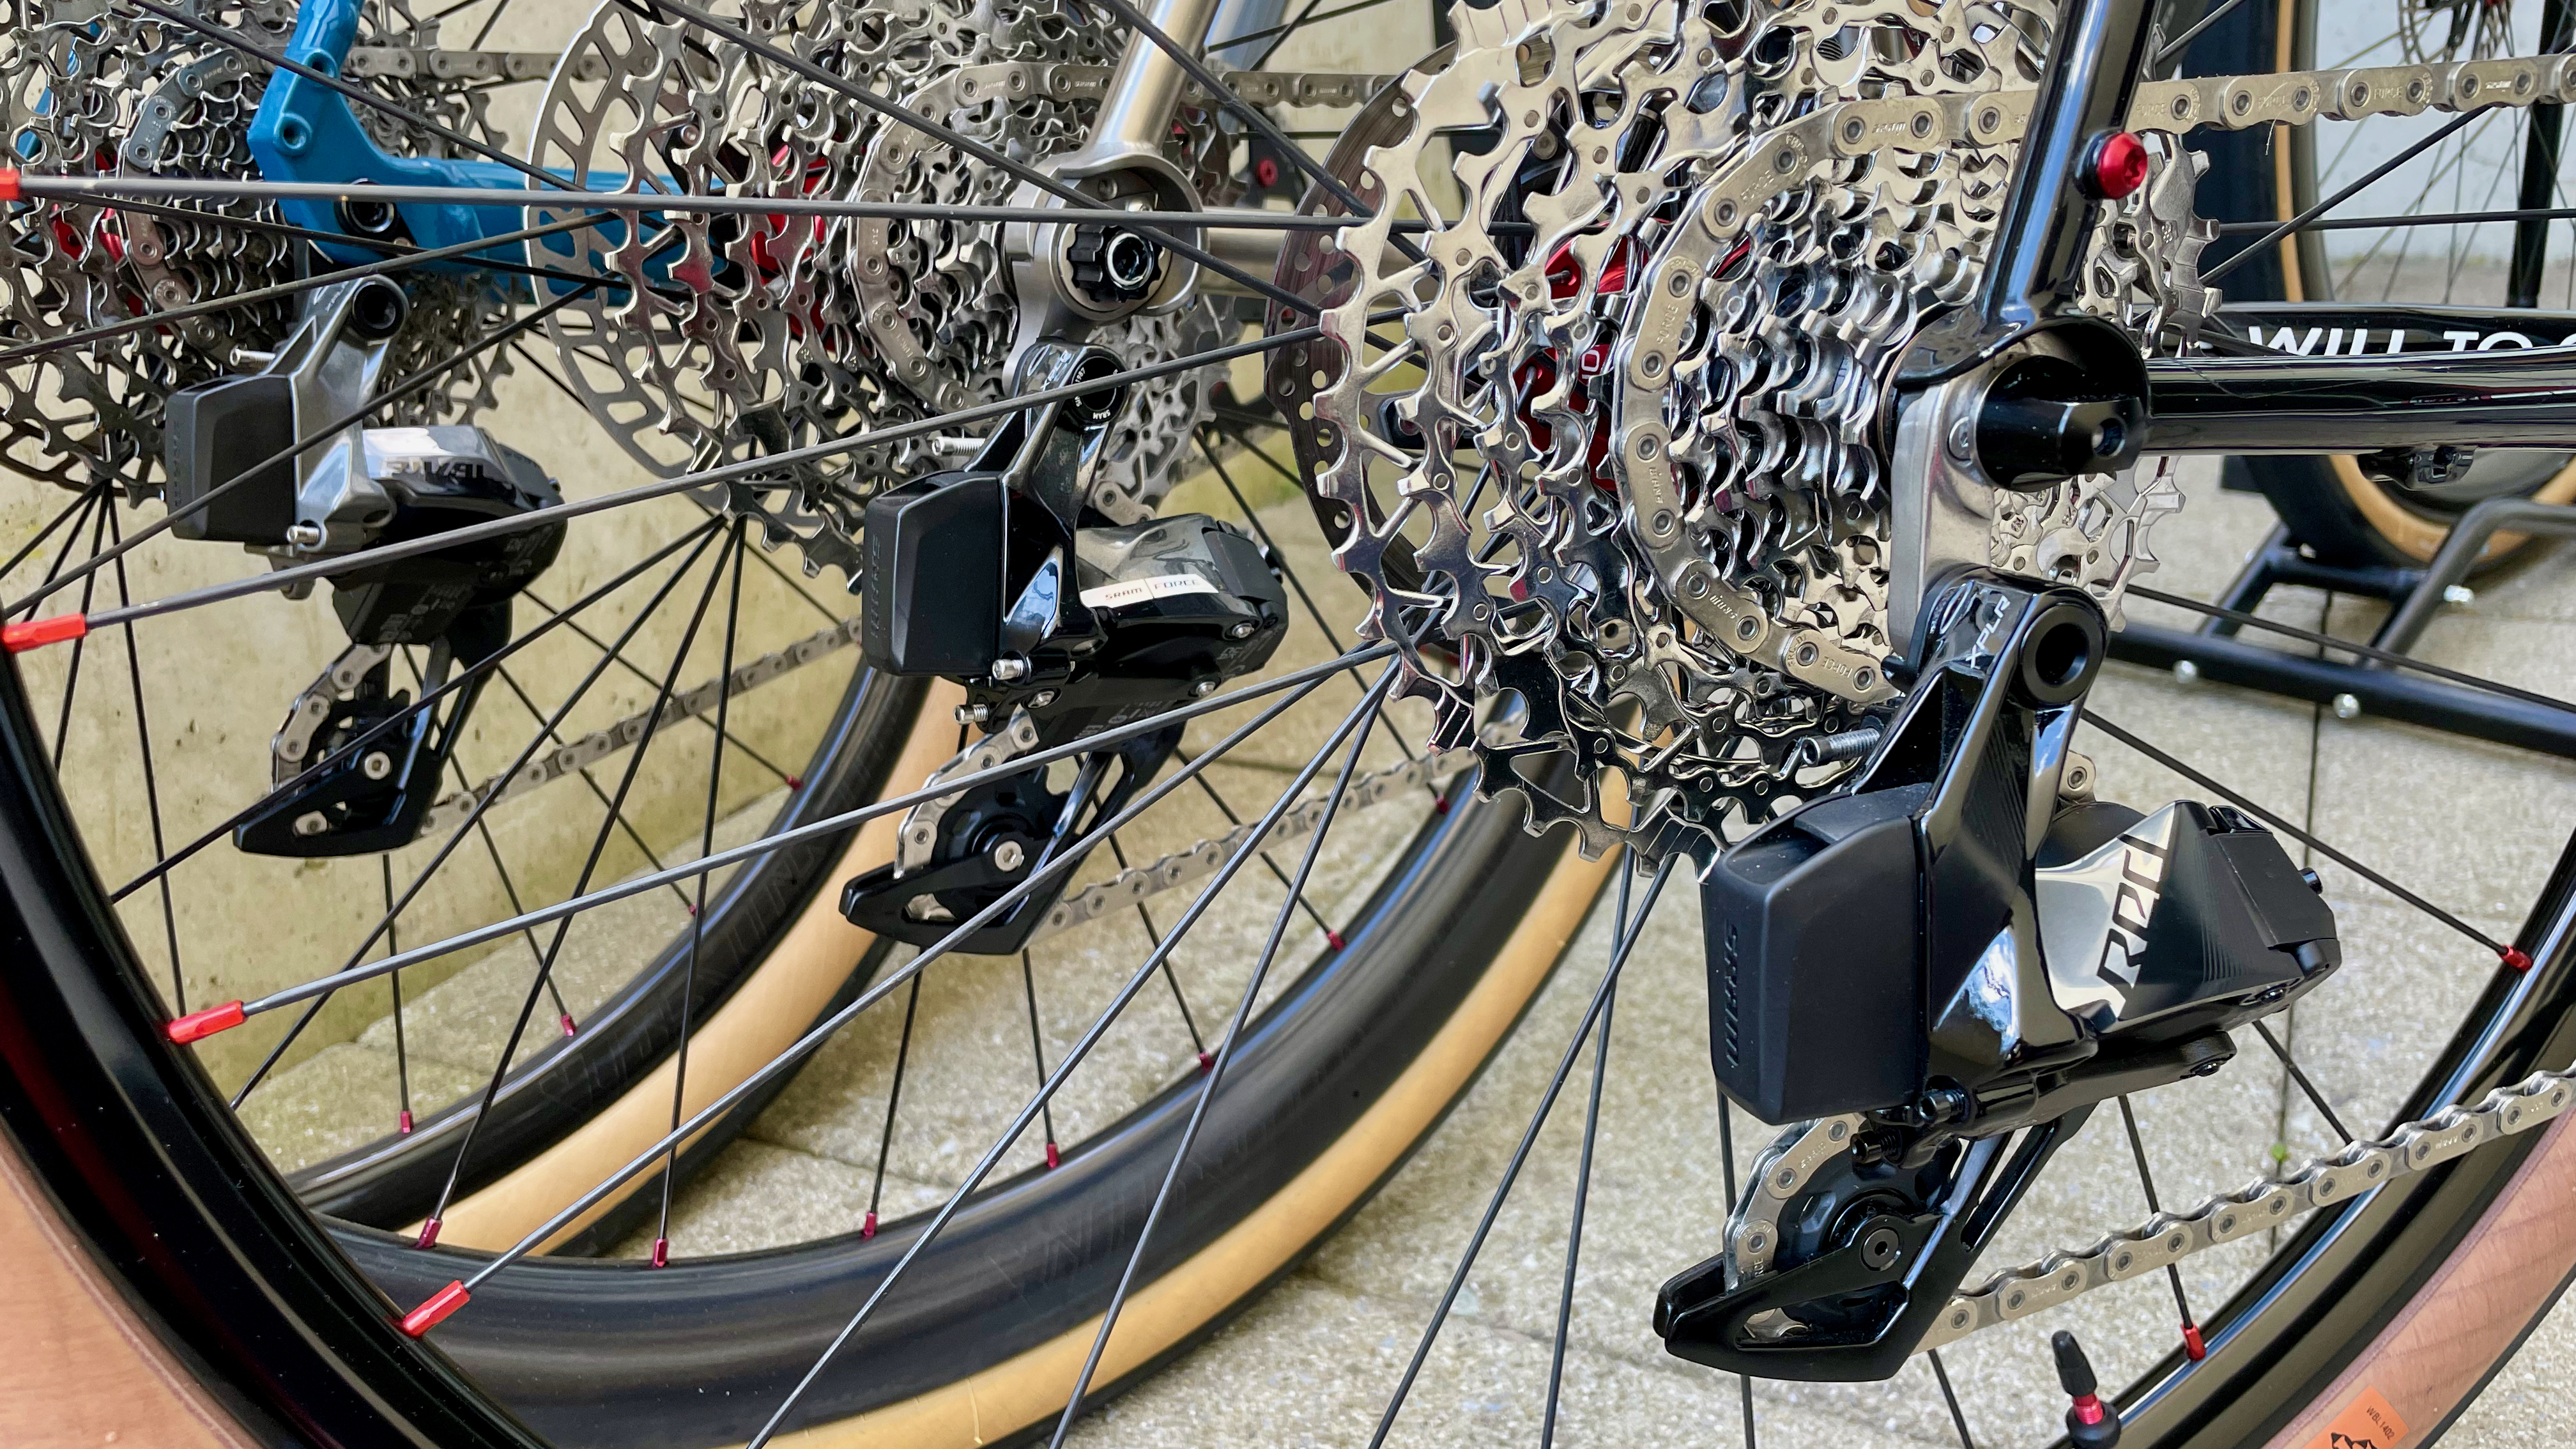 SRAM XPLR Rival, Force and Red AXS derailleurs